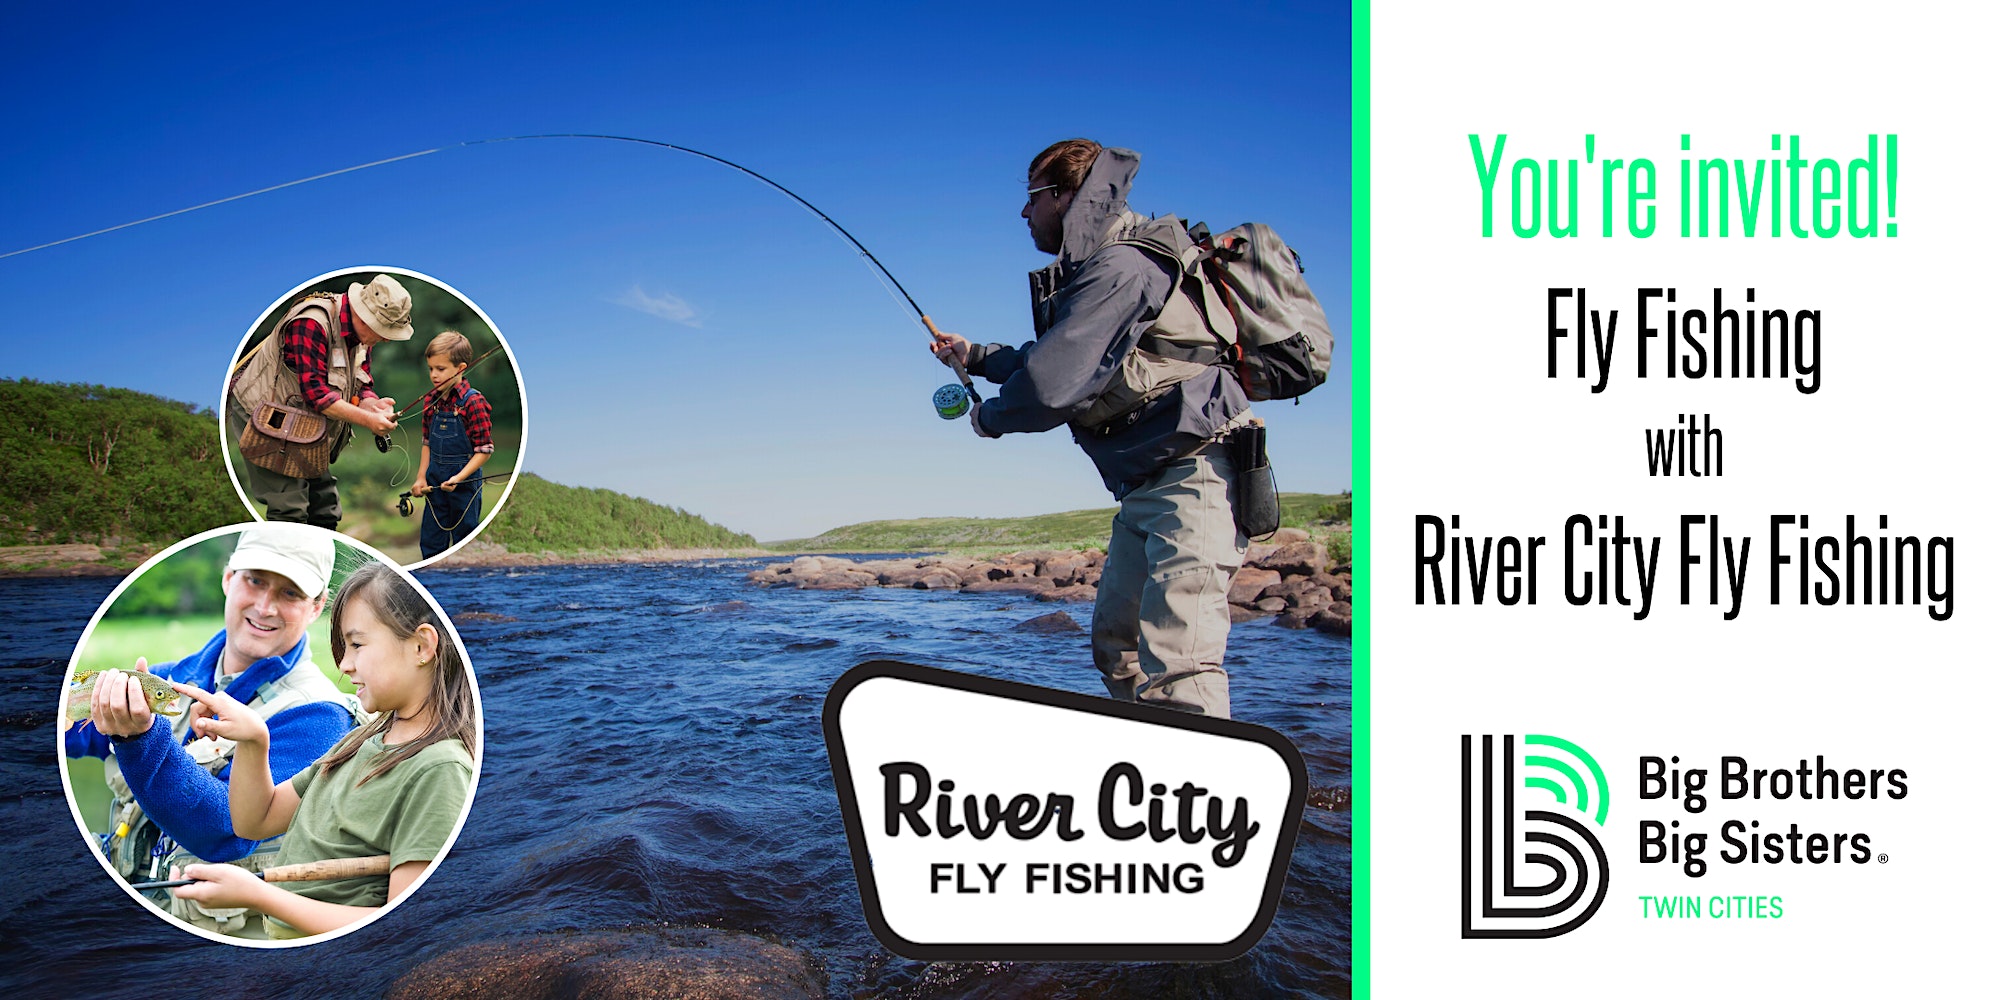 Fly Fishing with River City Fly Fishing - BBBS Twin Cities